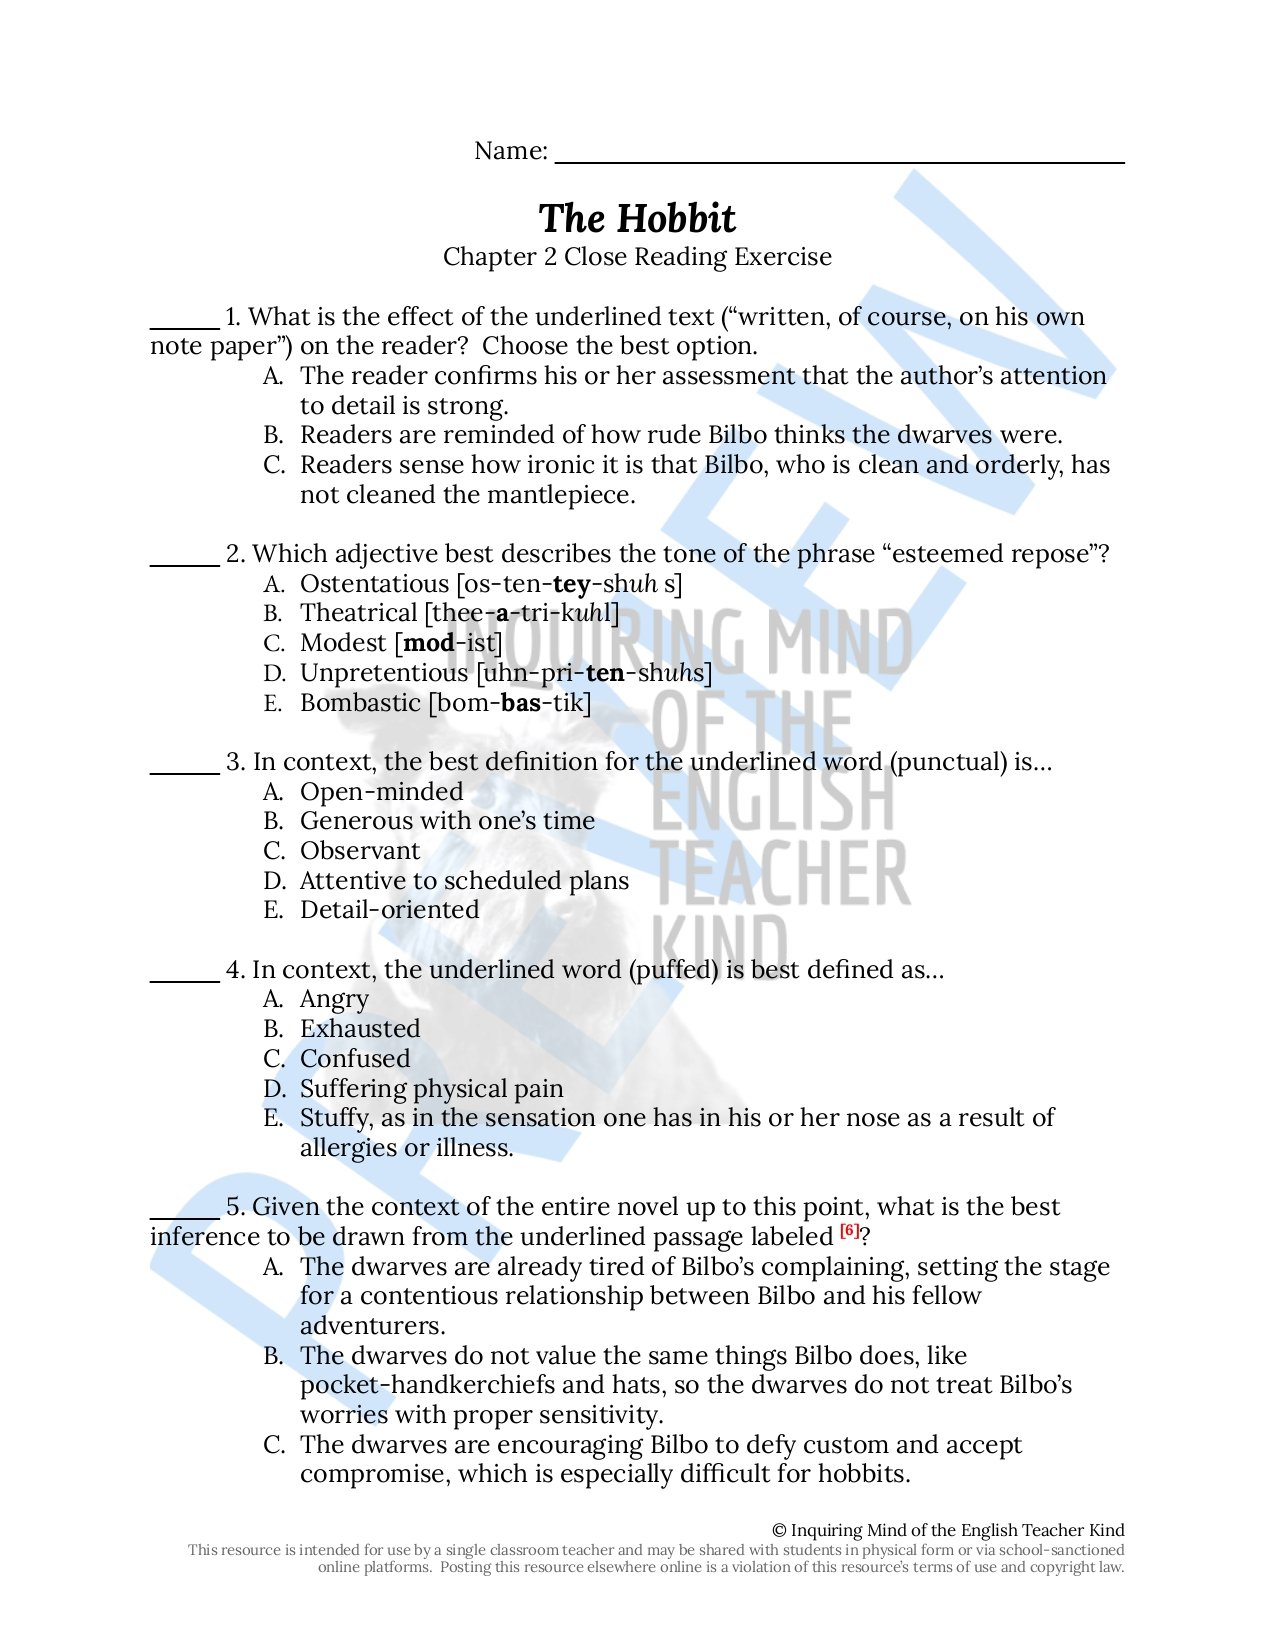 The Hobbit Chapter 2 Close Reading Worksheet And Answer Key Inquiring Mind Of The English